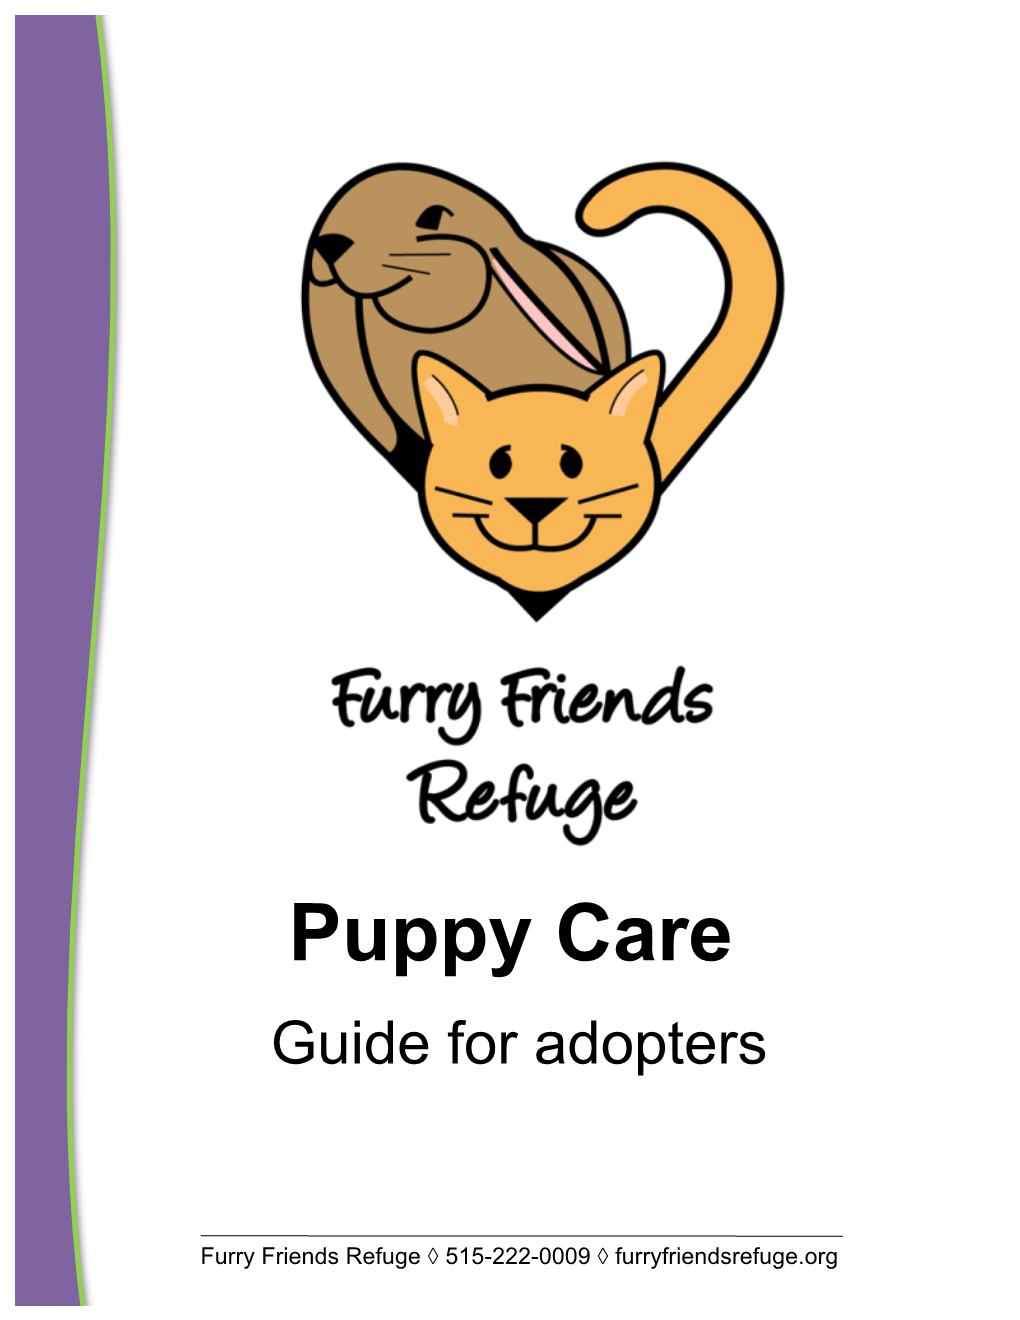 Puppy Care Guide for Adopters